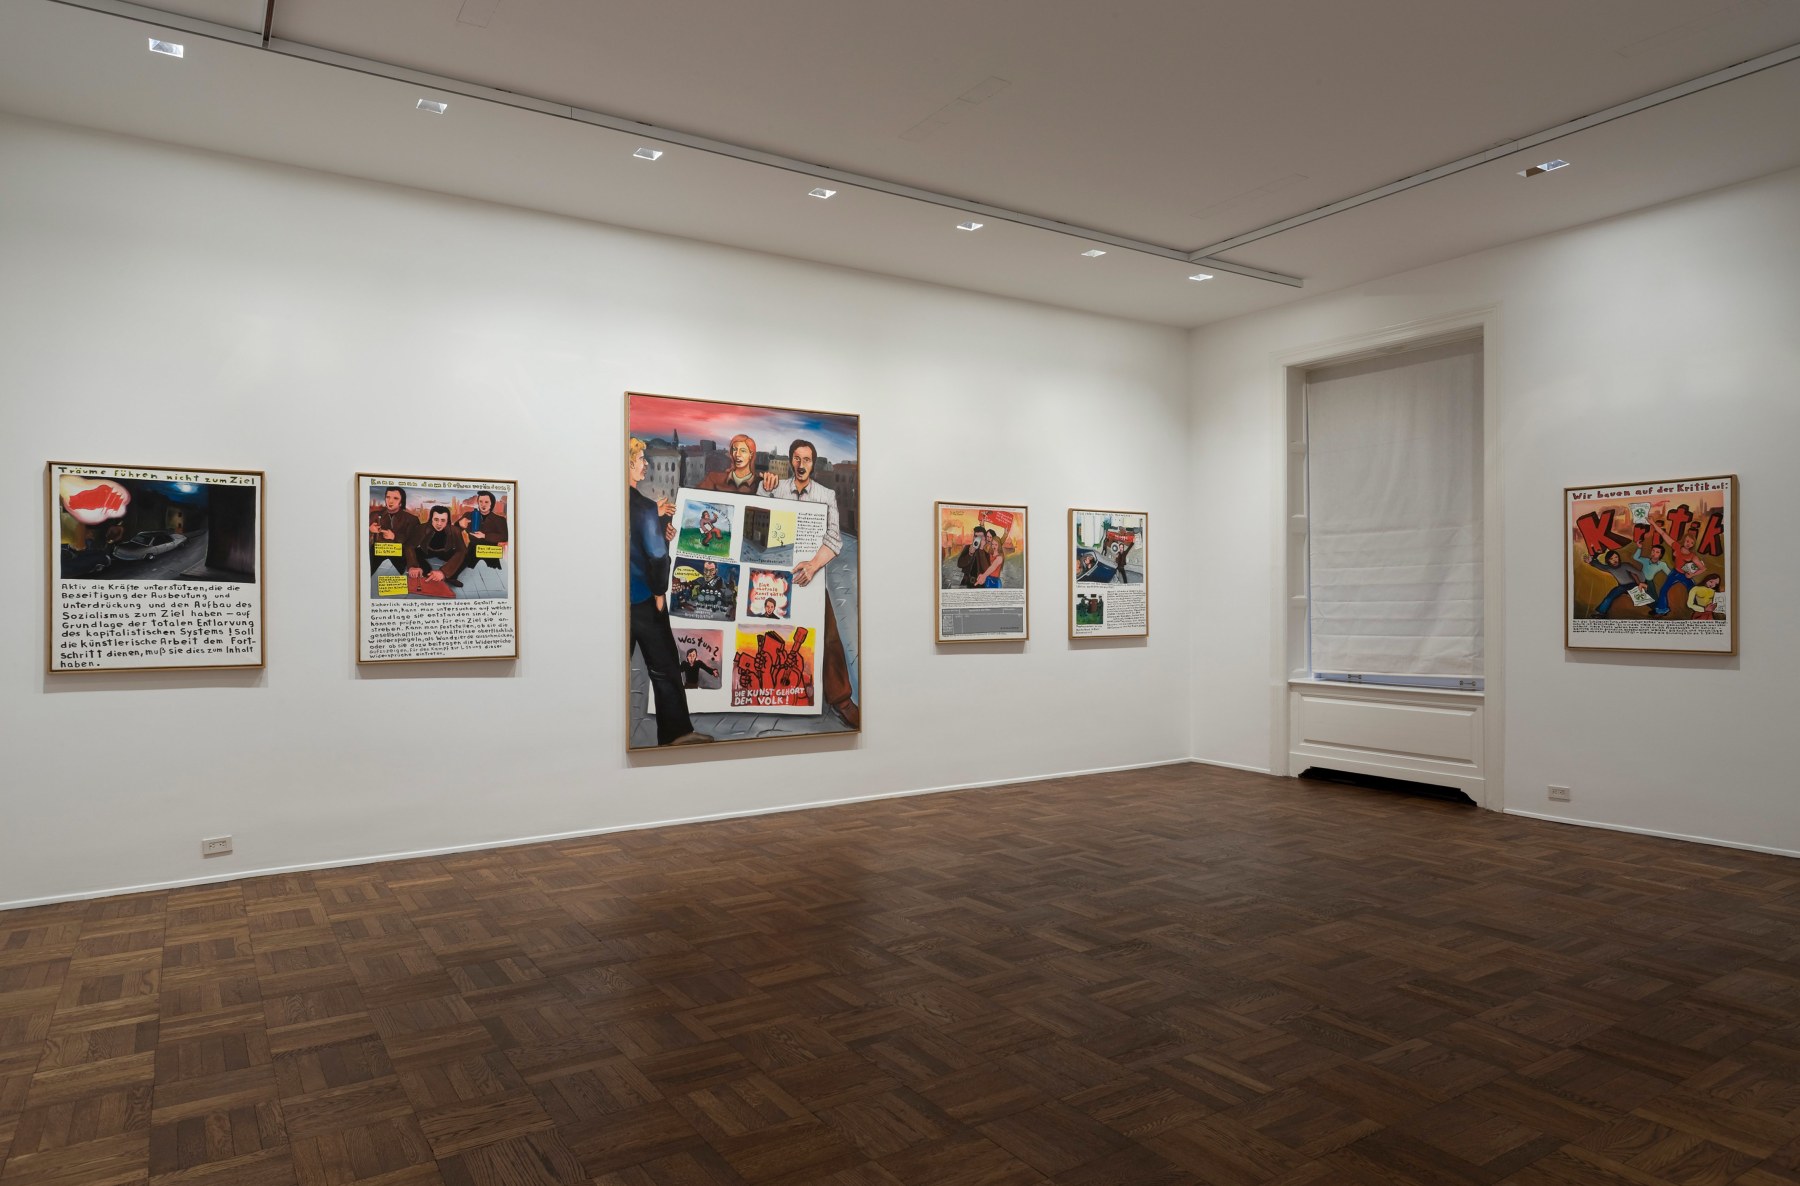 J&Ouml;RG IMMENDORFF, Maoist Paintings - The Early Seventies, 2009, Michael Werner New York Image 2